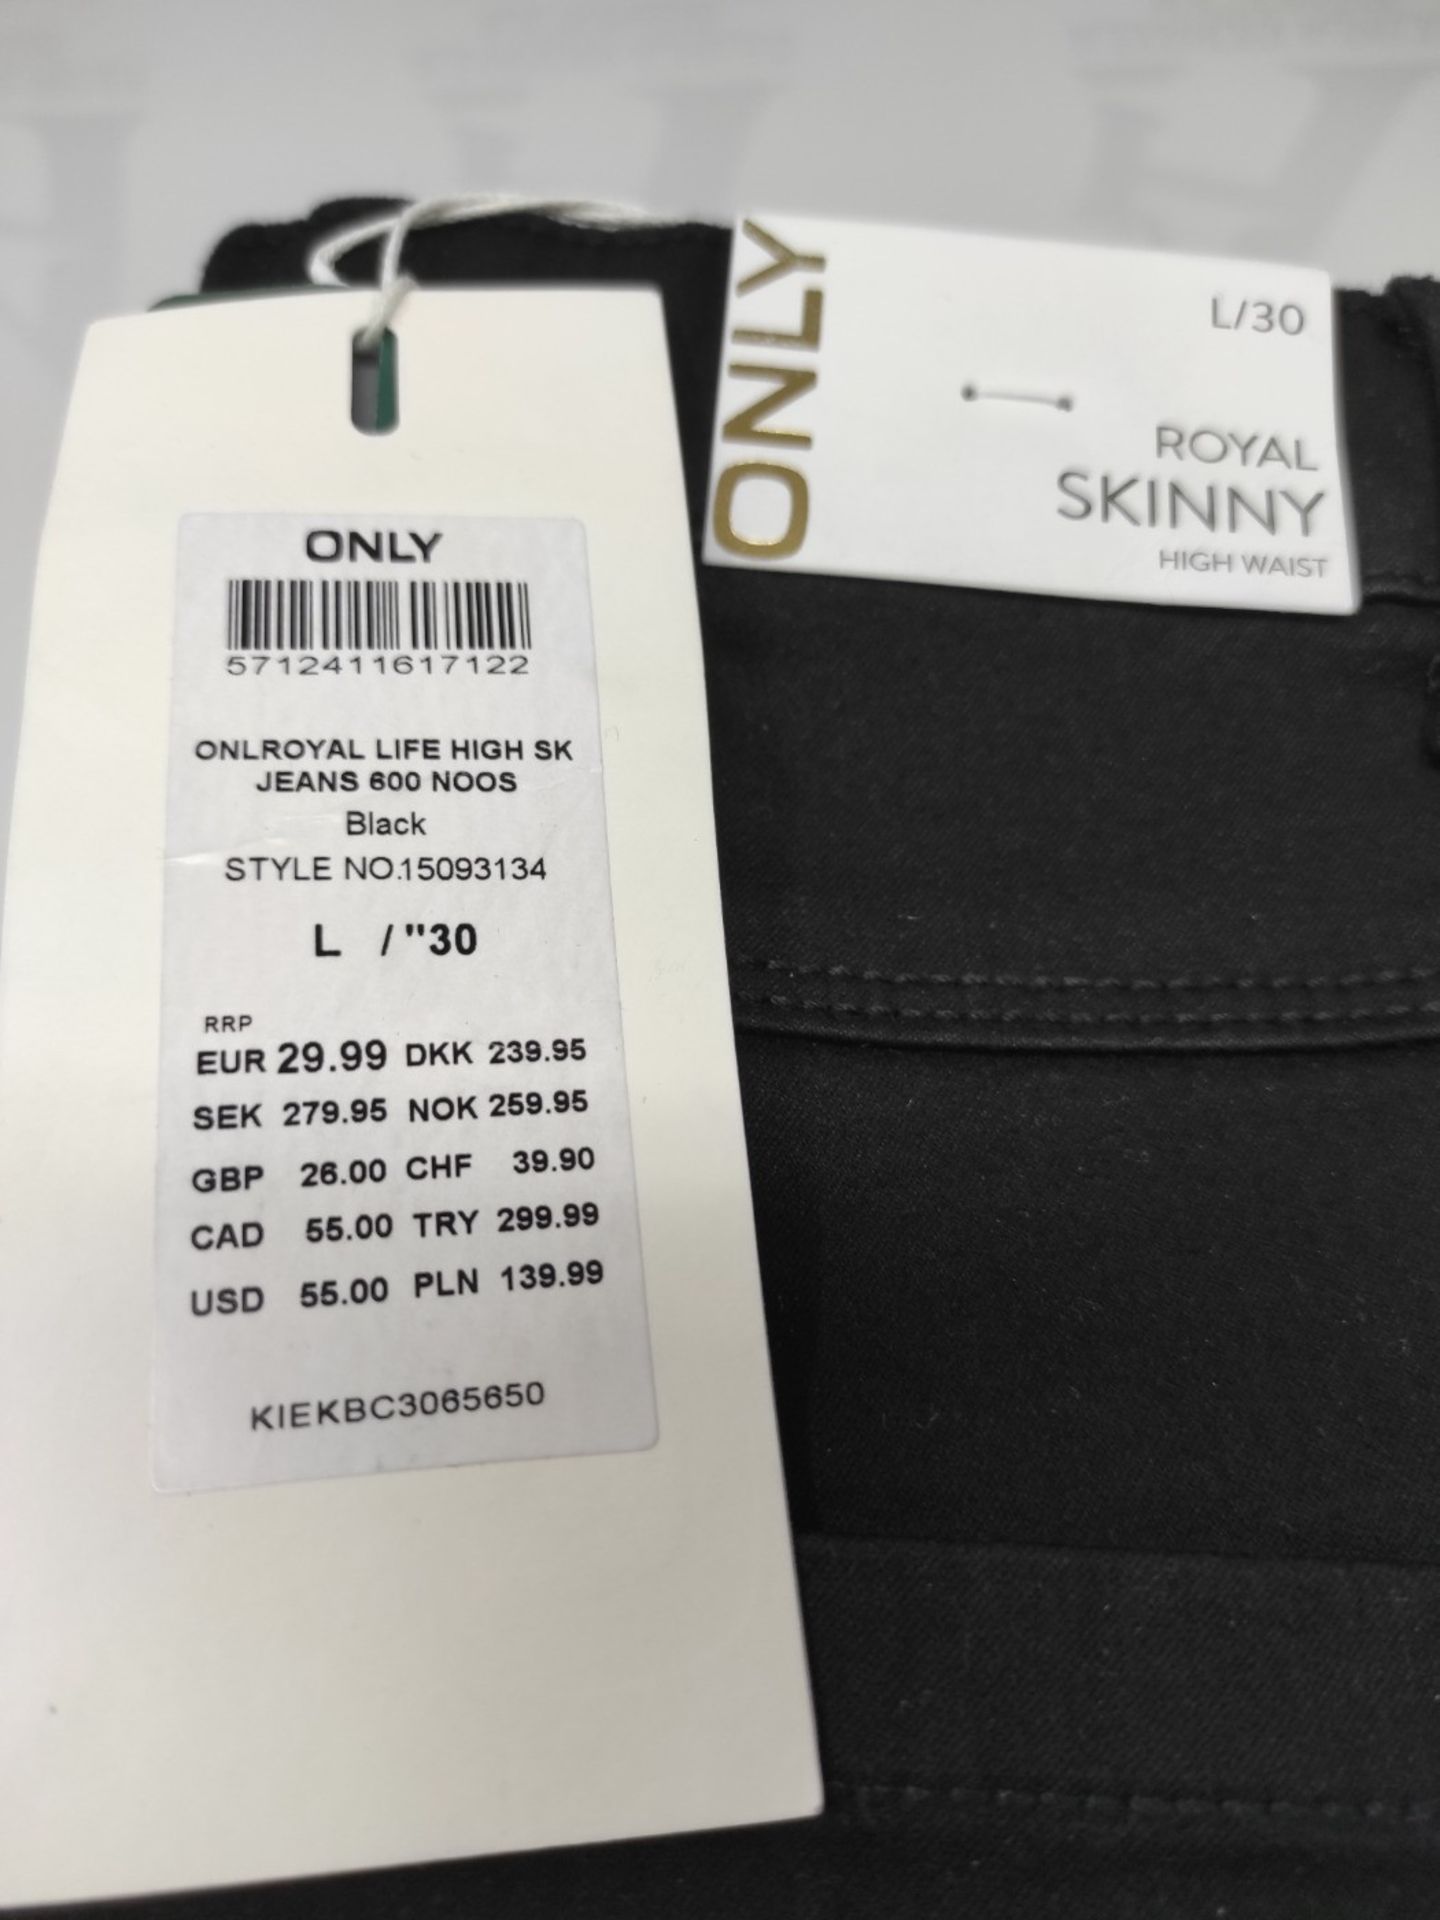 Only Onlroyal Life High Sk Jeans 600 Noos Jeans, Black, L / 30L Women - Image 3 of 3